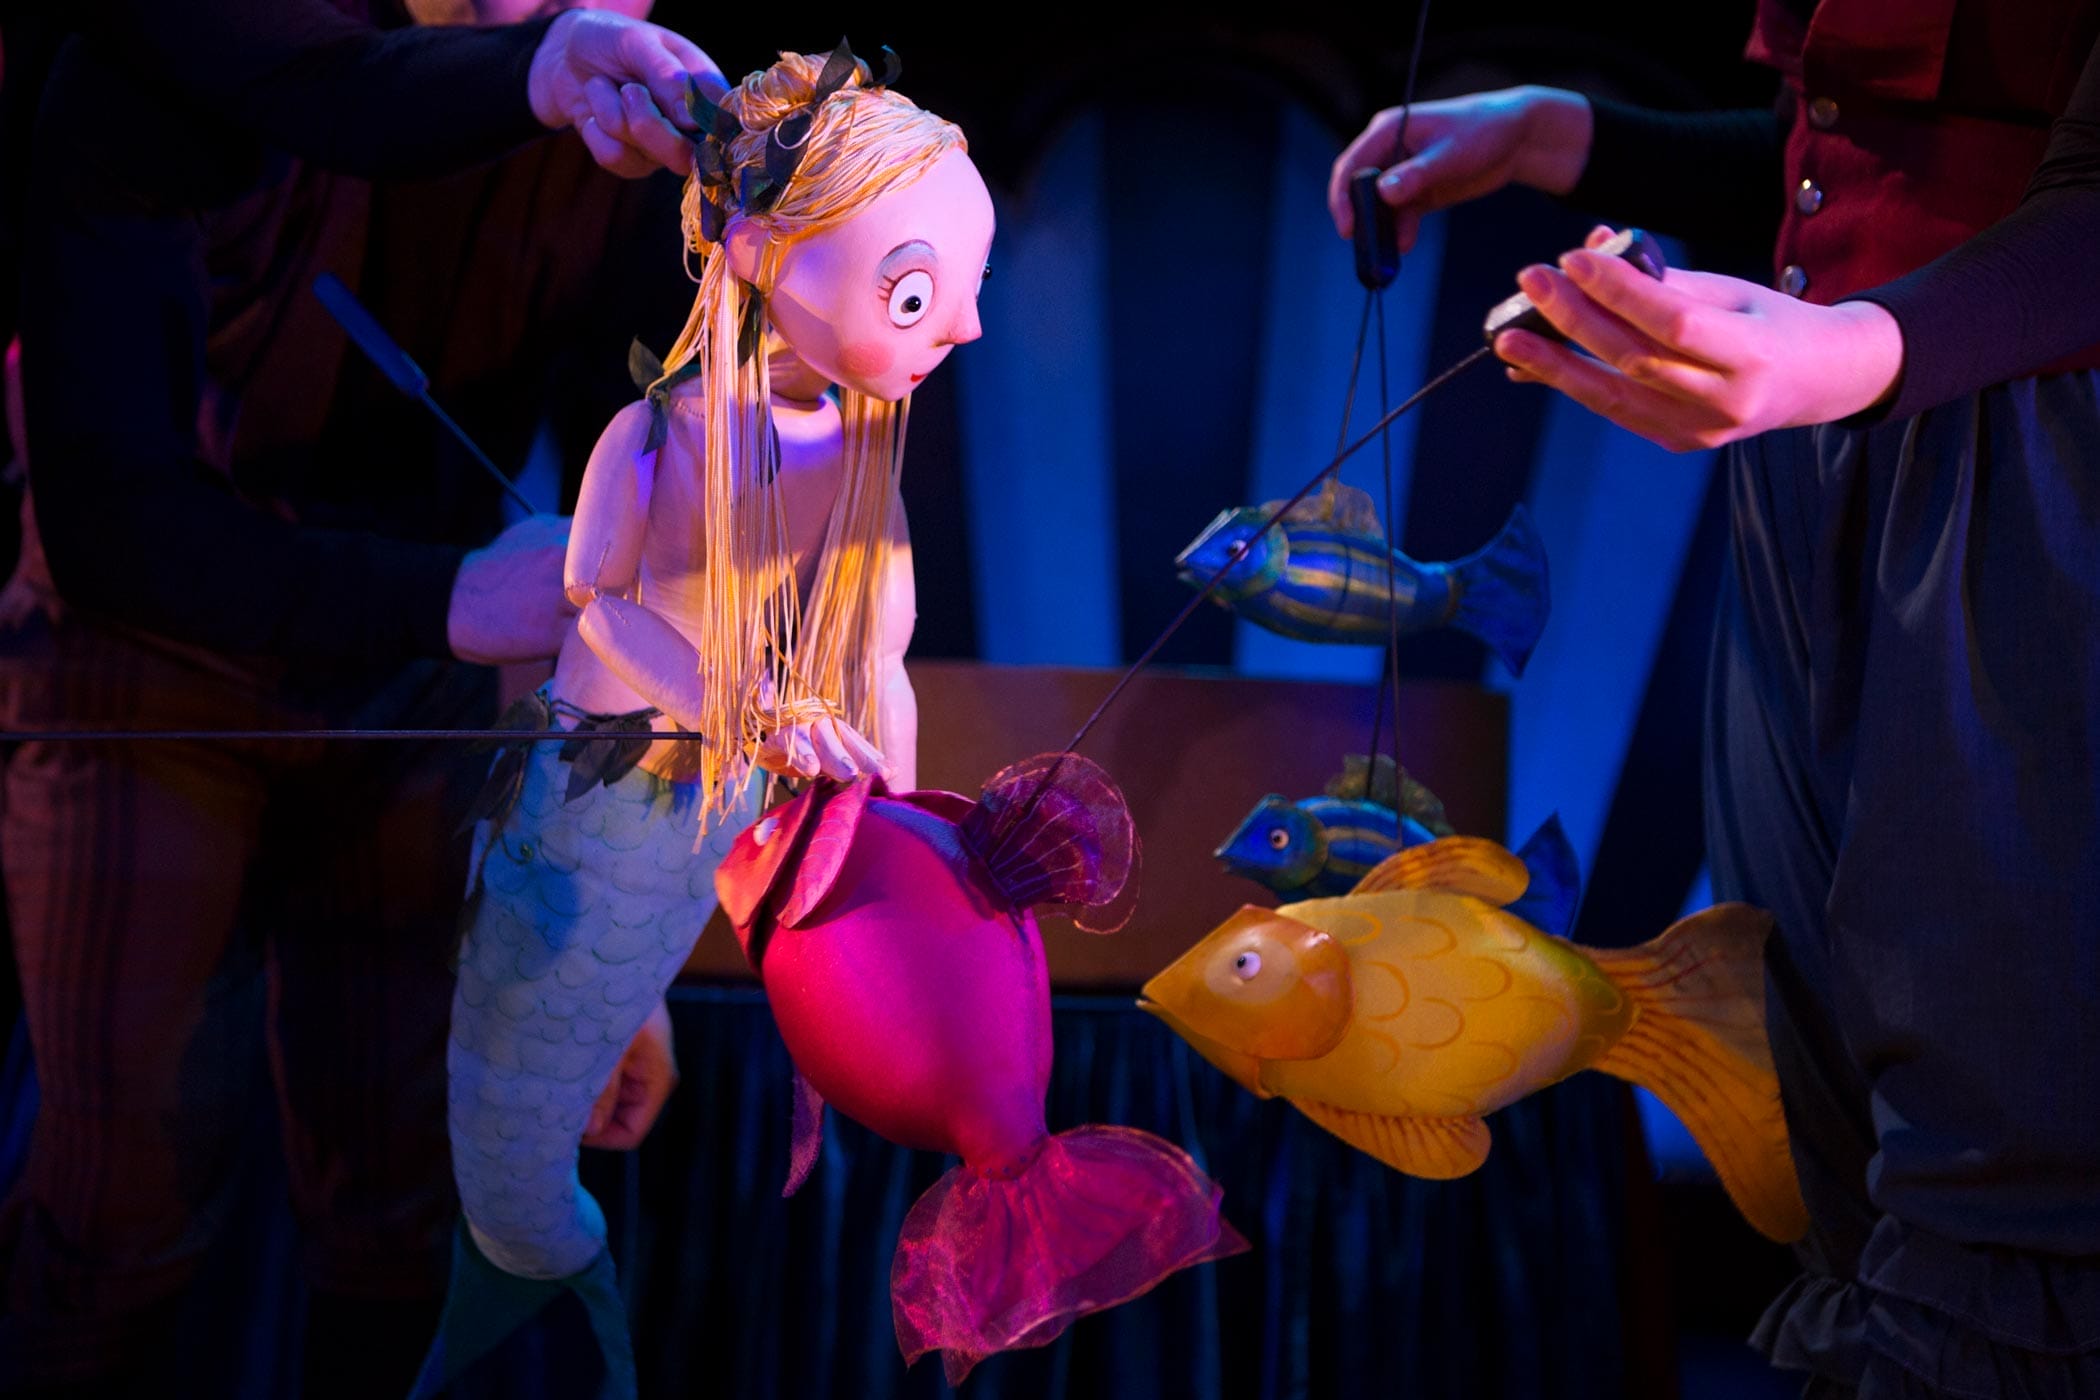 A mermaid puppet surrounded by wooden fish puppets. The hands of puppeteers can be seen.